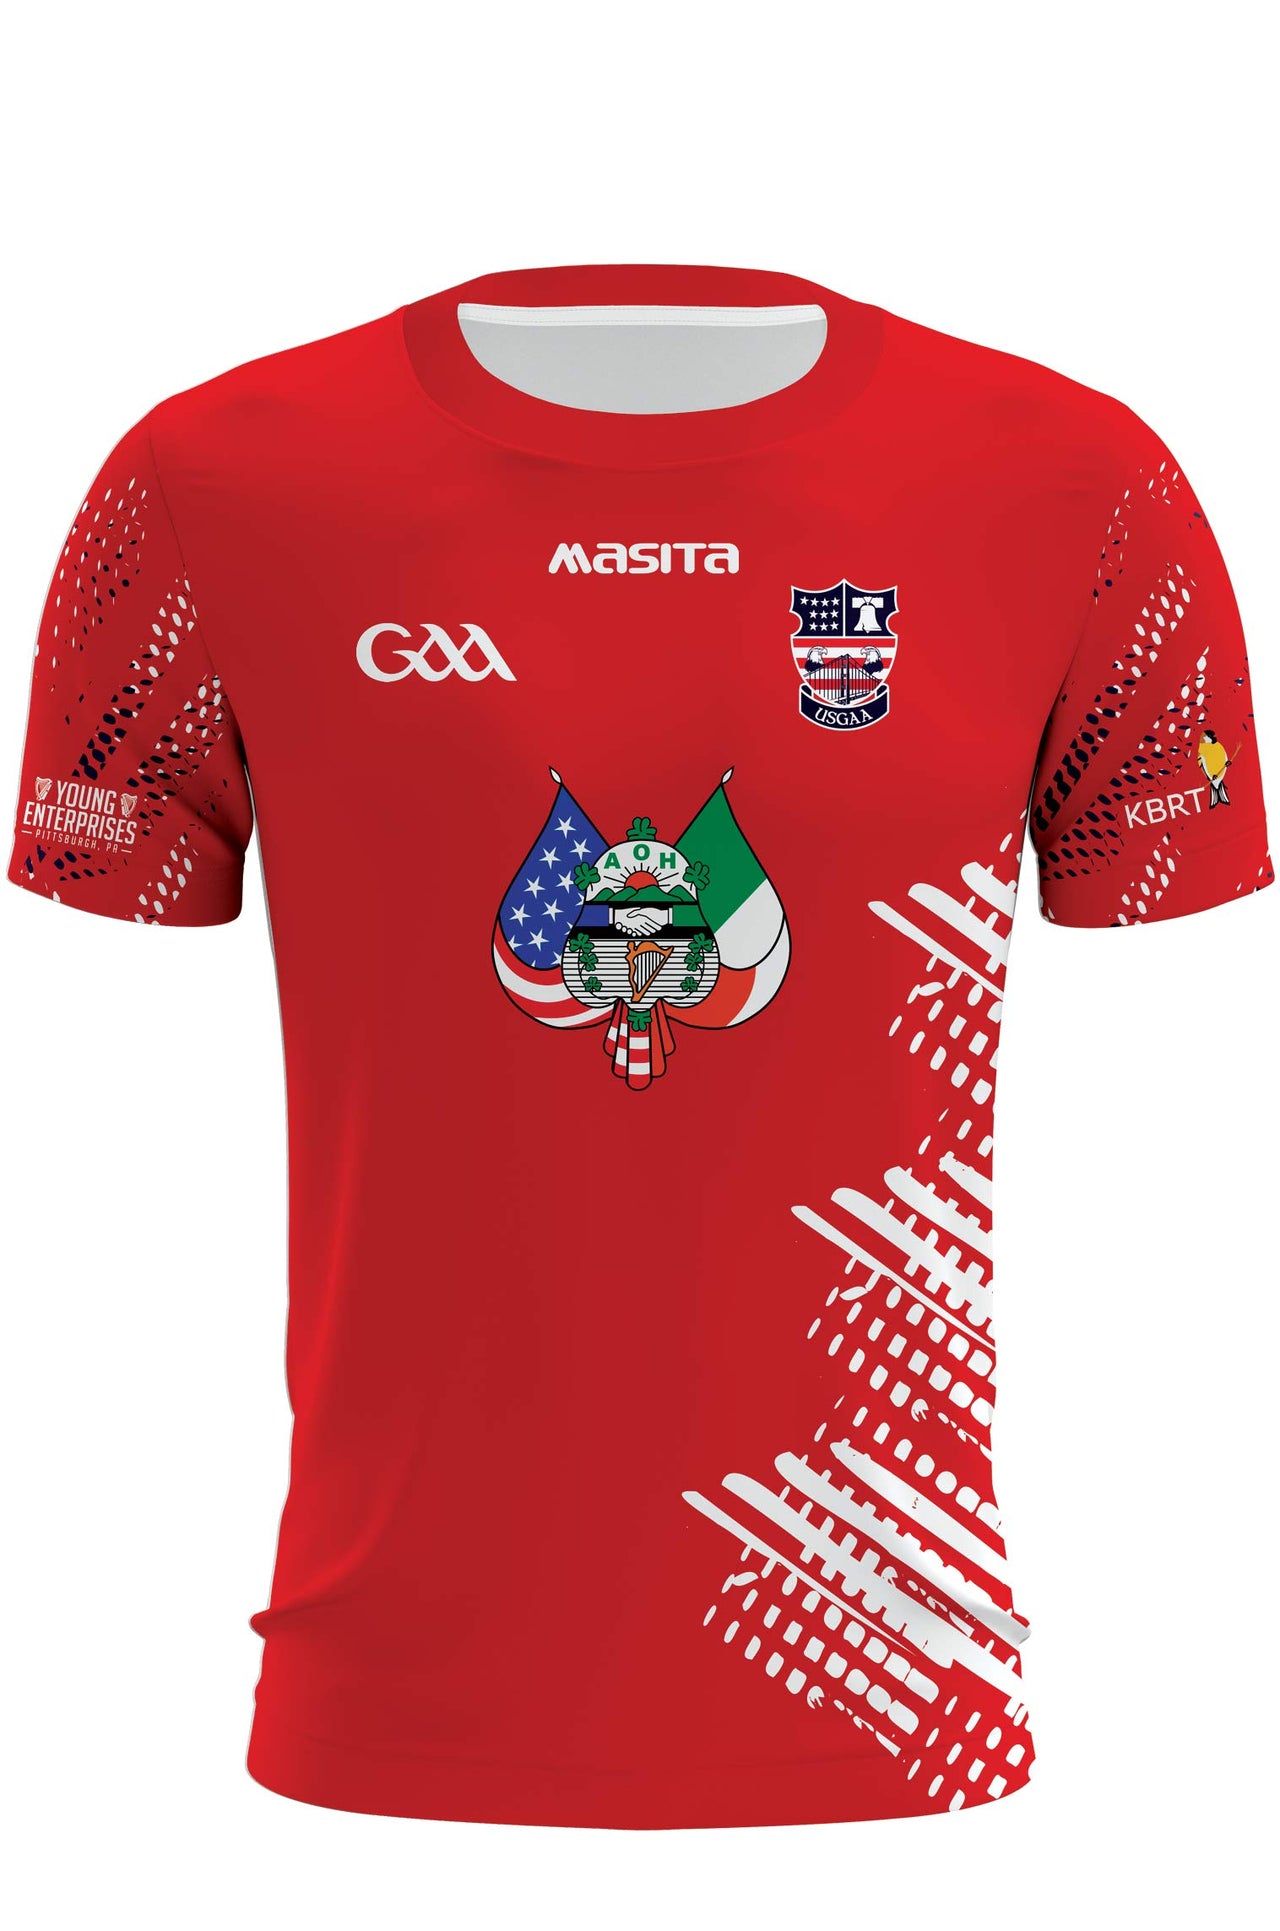 USGAA County Red Training Jersey Player Fit Adult